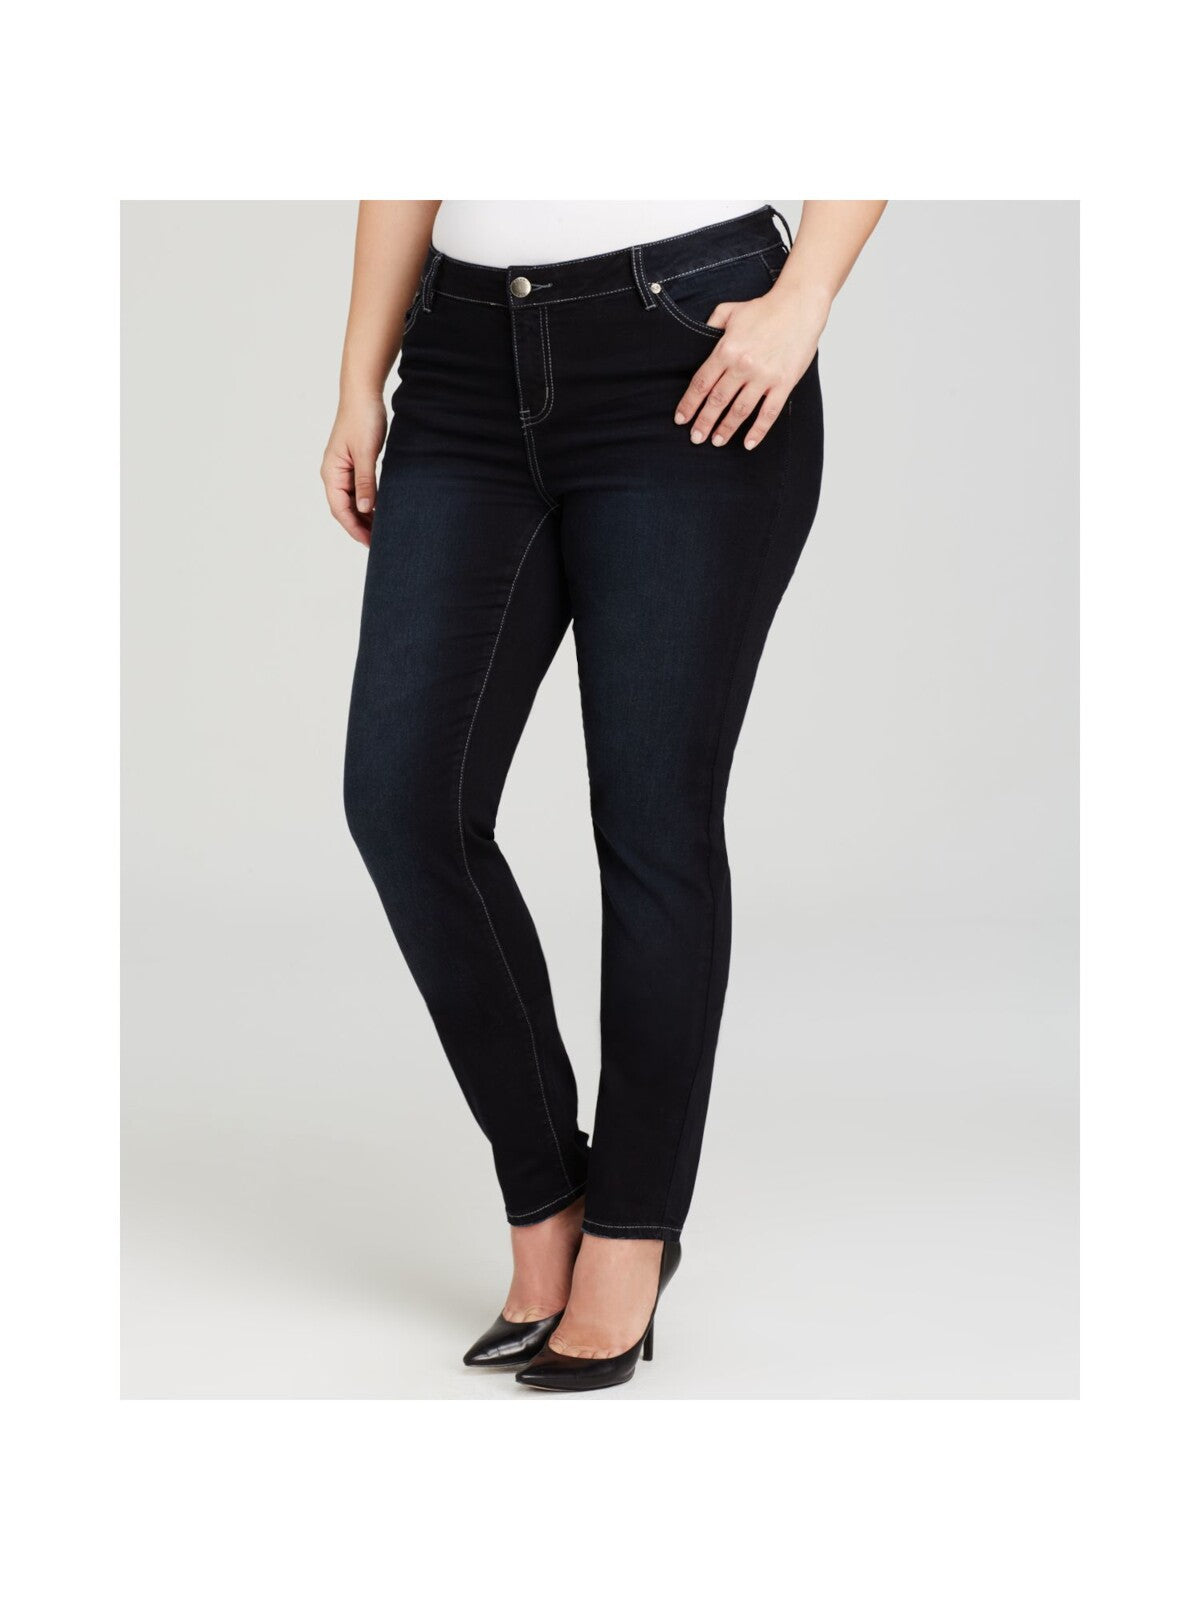 MYNT 1792 Womens Stretch Zippered Pocketed Skinny Jeans